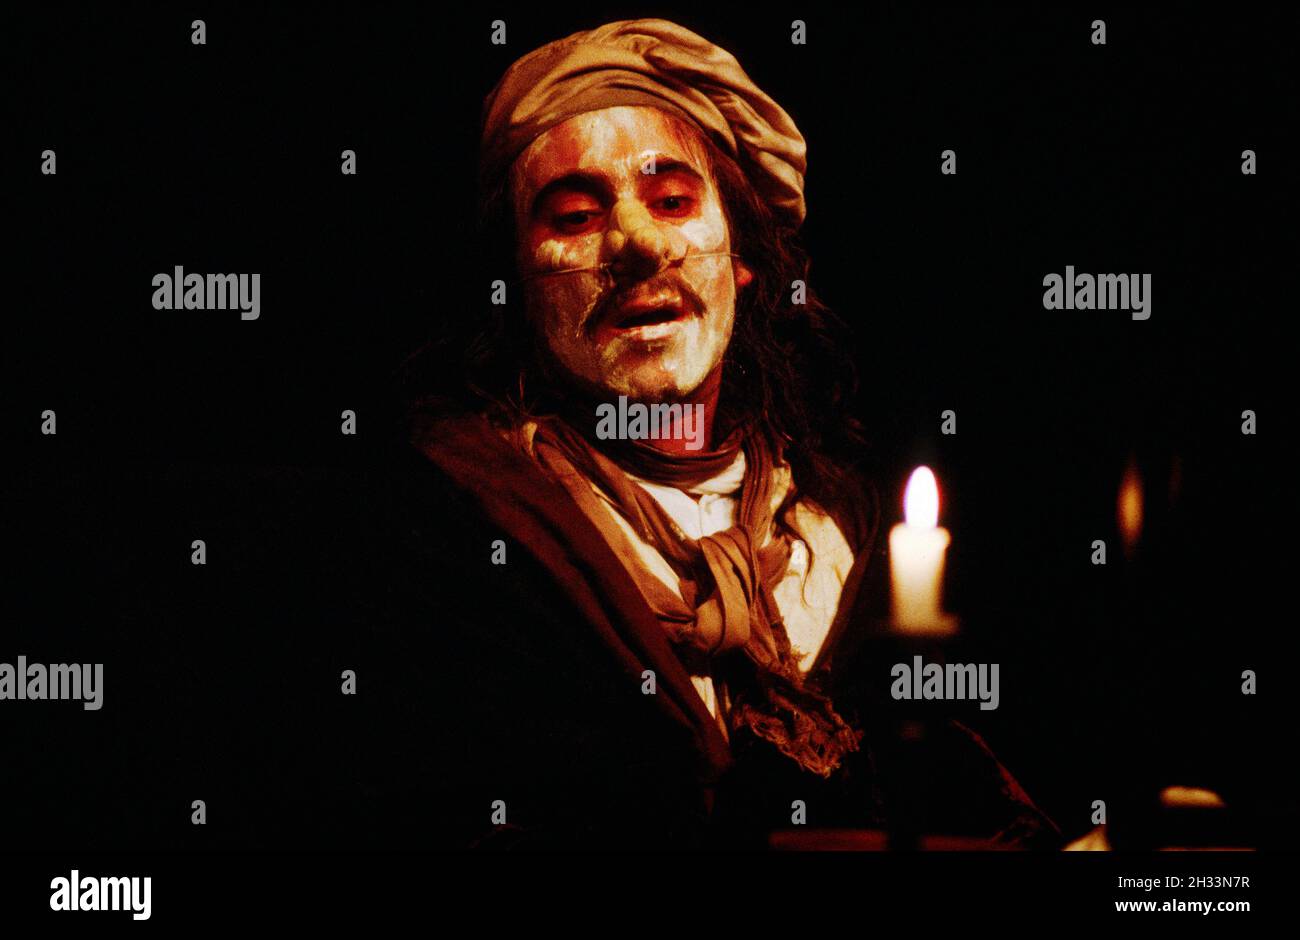 Antony Sher (Moliere) in MOLIERE by Bulgakov at the Royal Shakespeare Company (RSC), The Other Place, Stratford-upon-Avon  05/08/1982  in a new version by Dusty Hughes  set design: Ralph Koltai  costumes: Annena Stubbs  lighting: Leo Leibovici  director: Bill Alexander Stock Photo